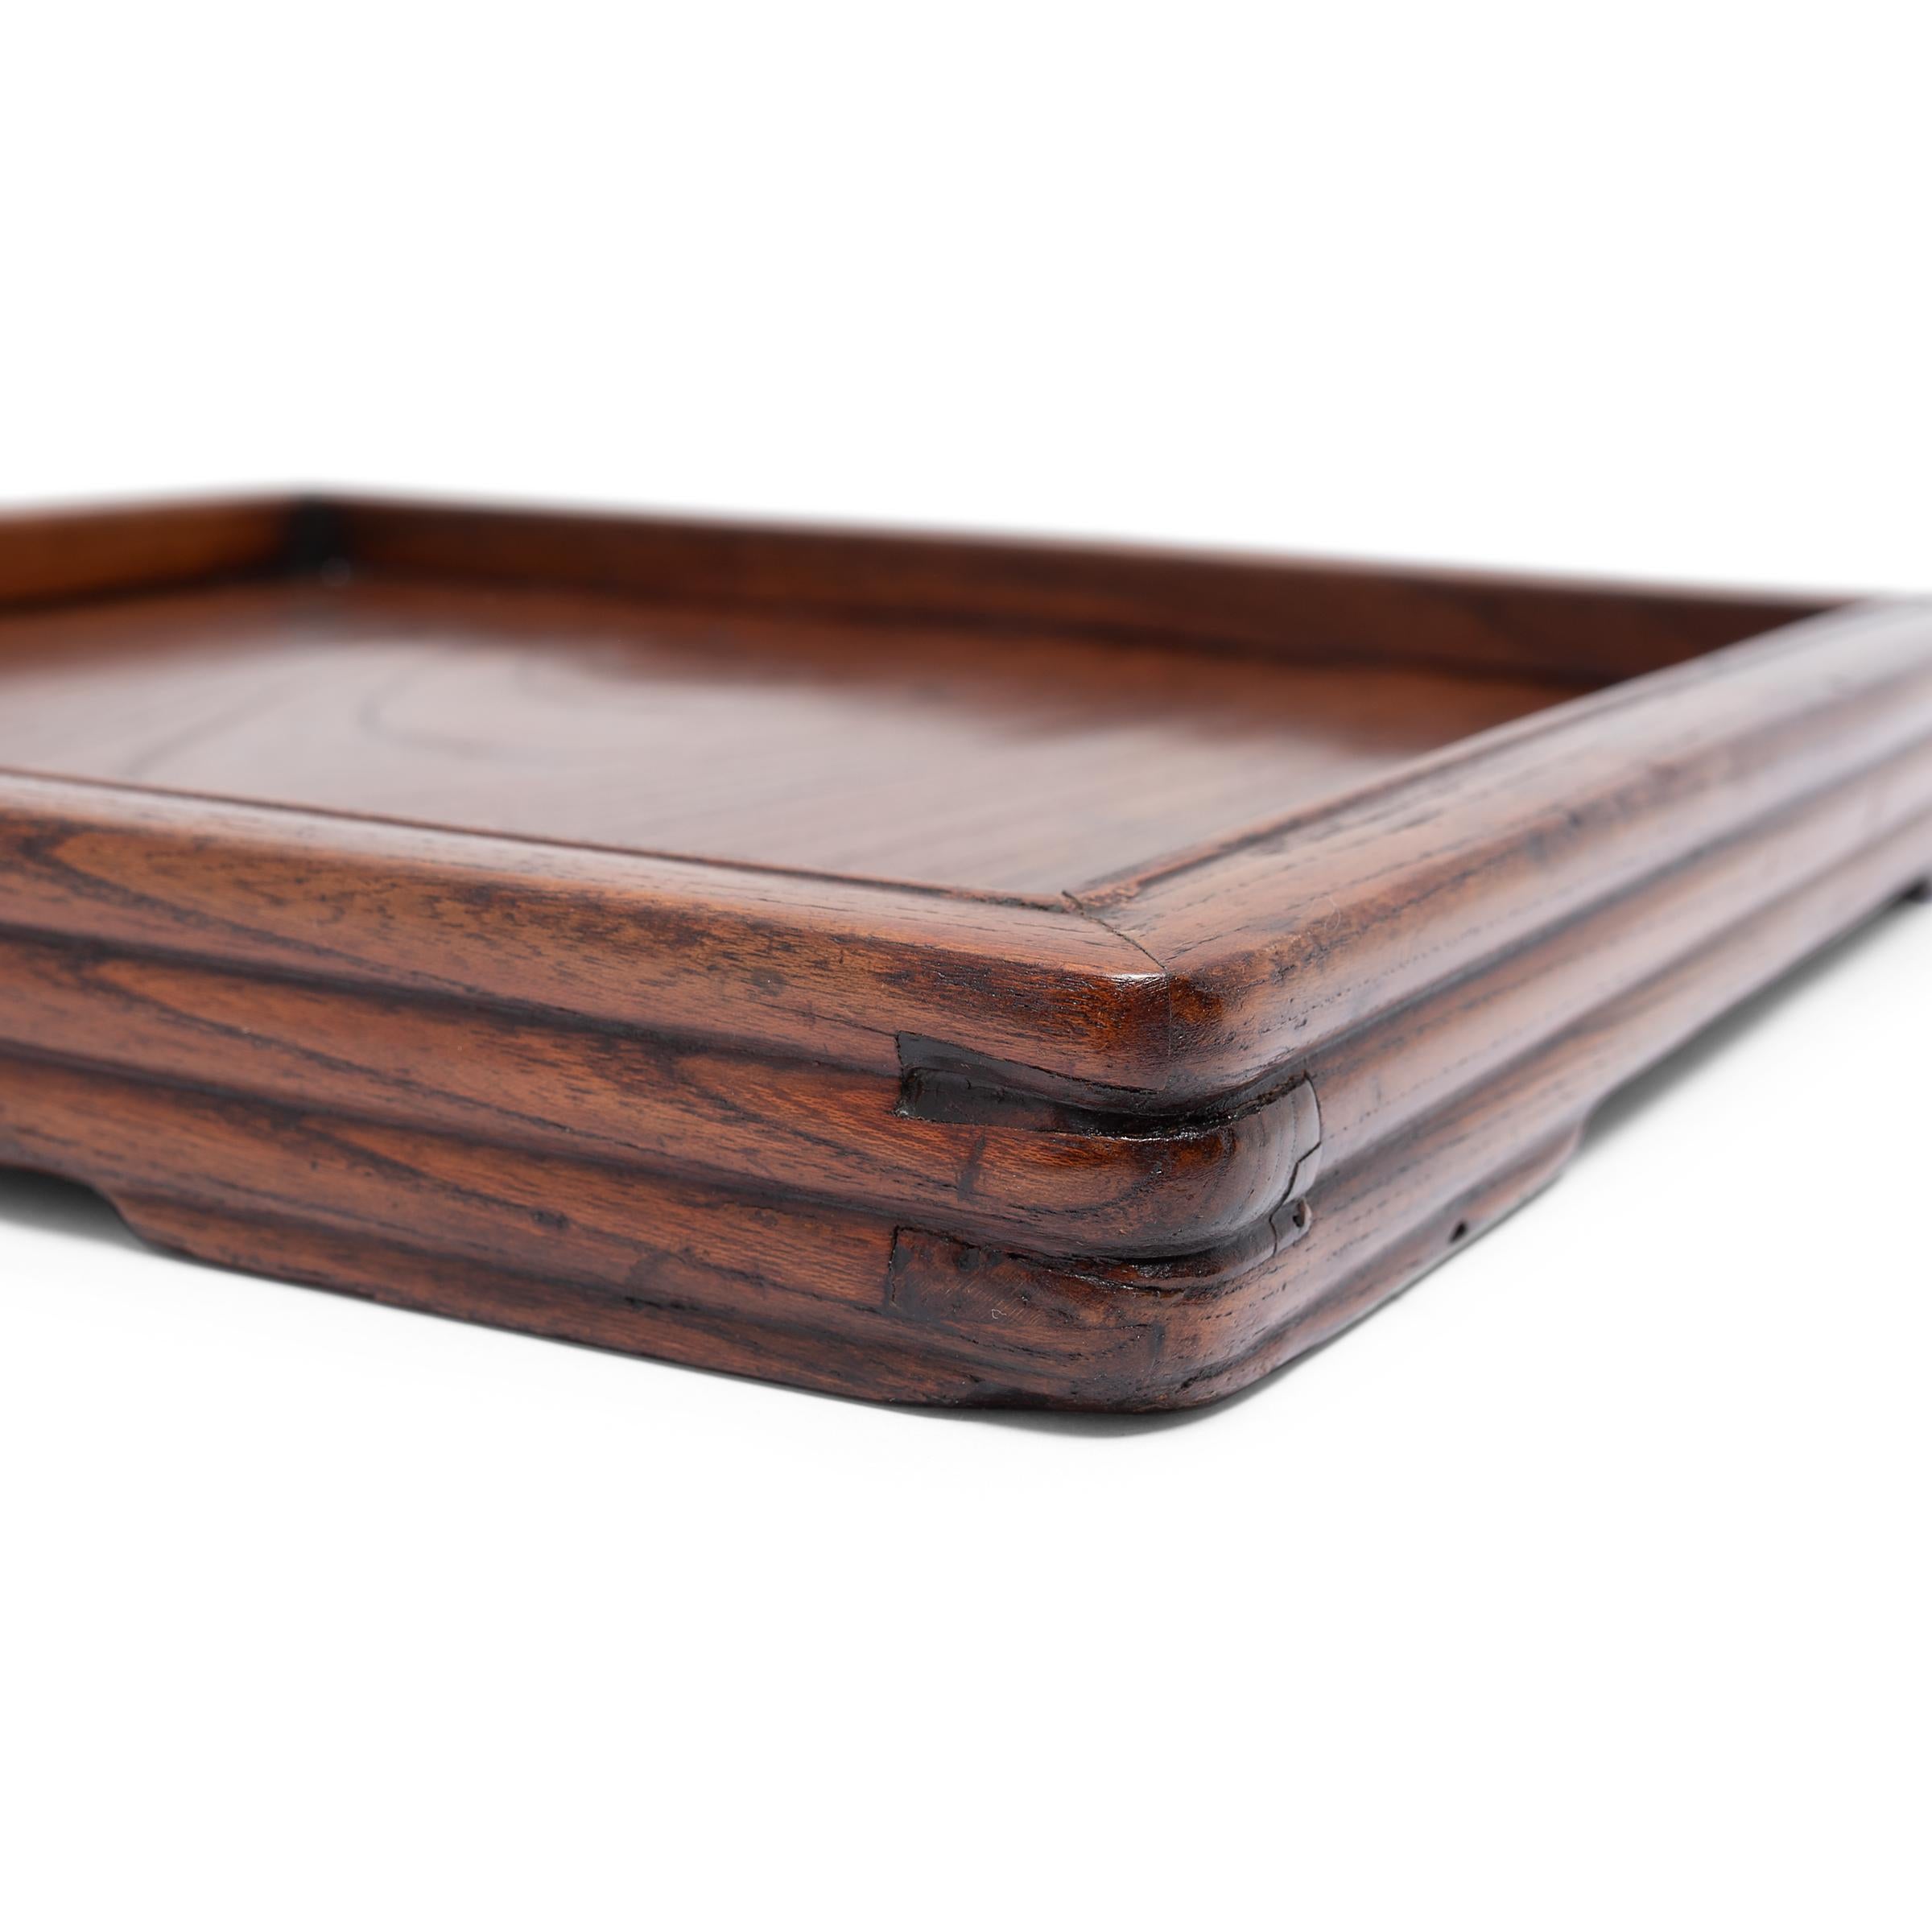 Carved Chinese Tea Tray with Ridged Sides, c. 1900 For Sale